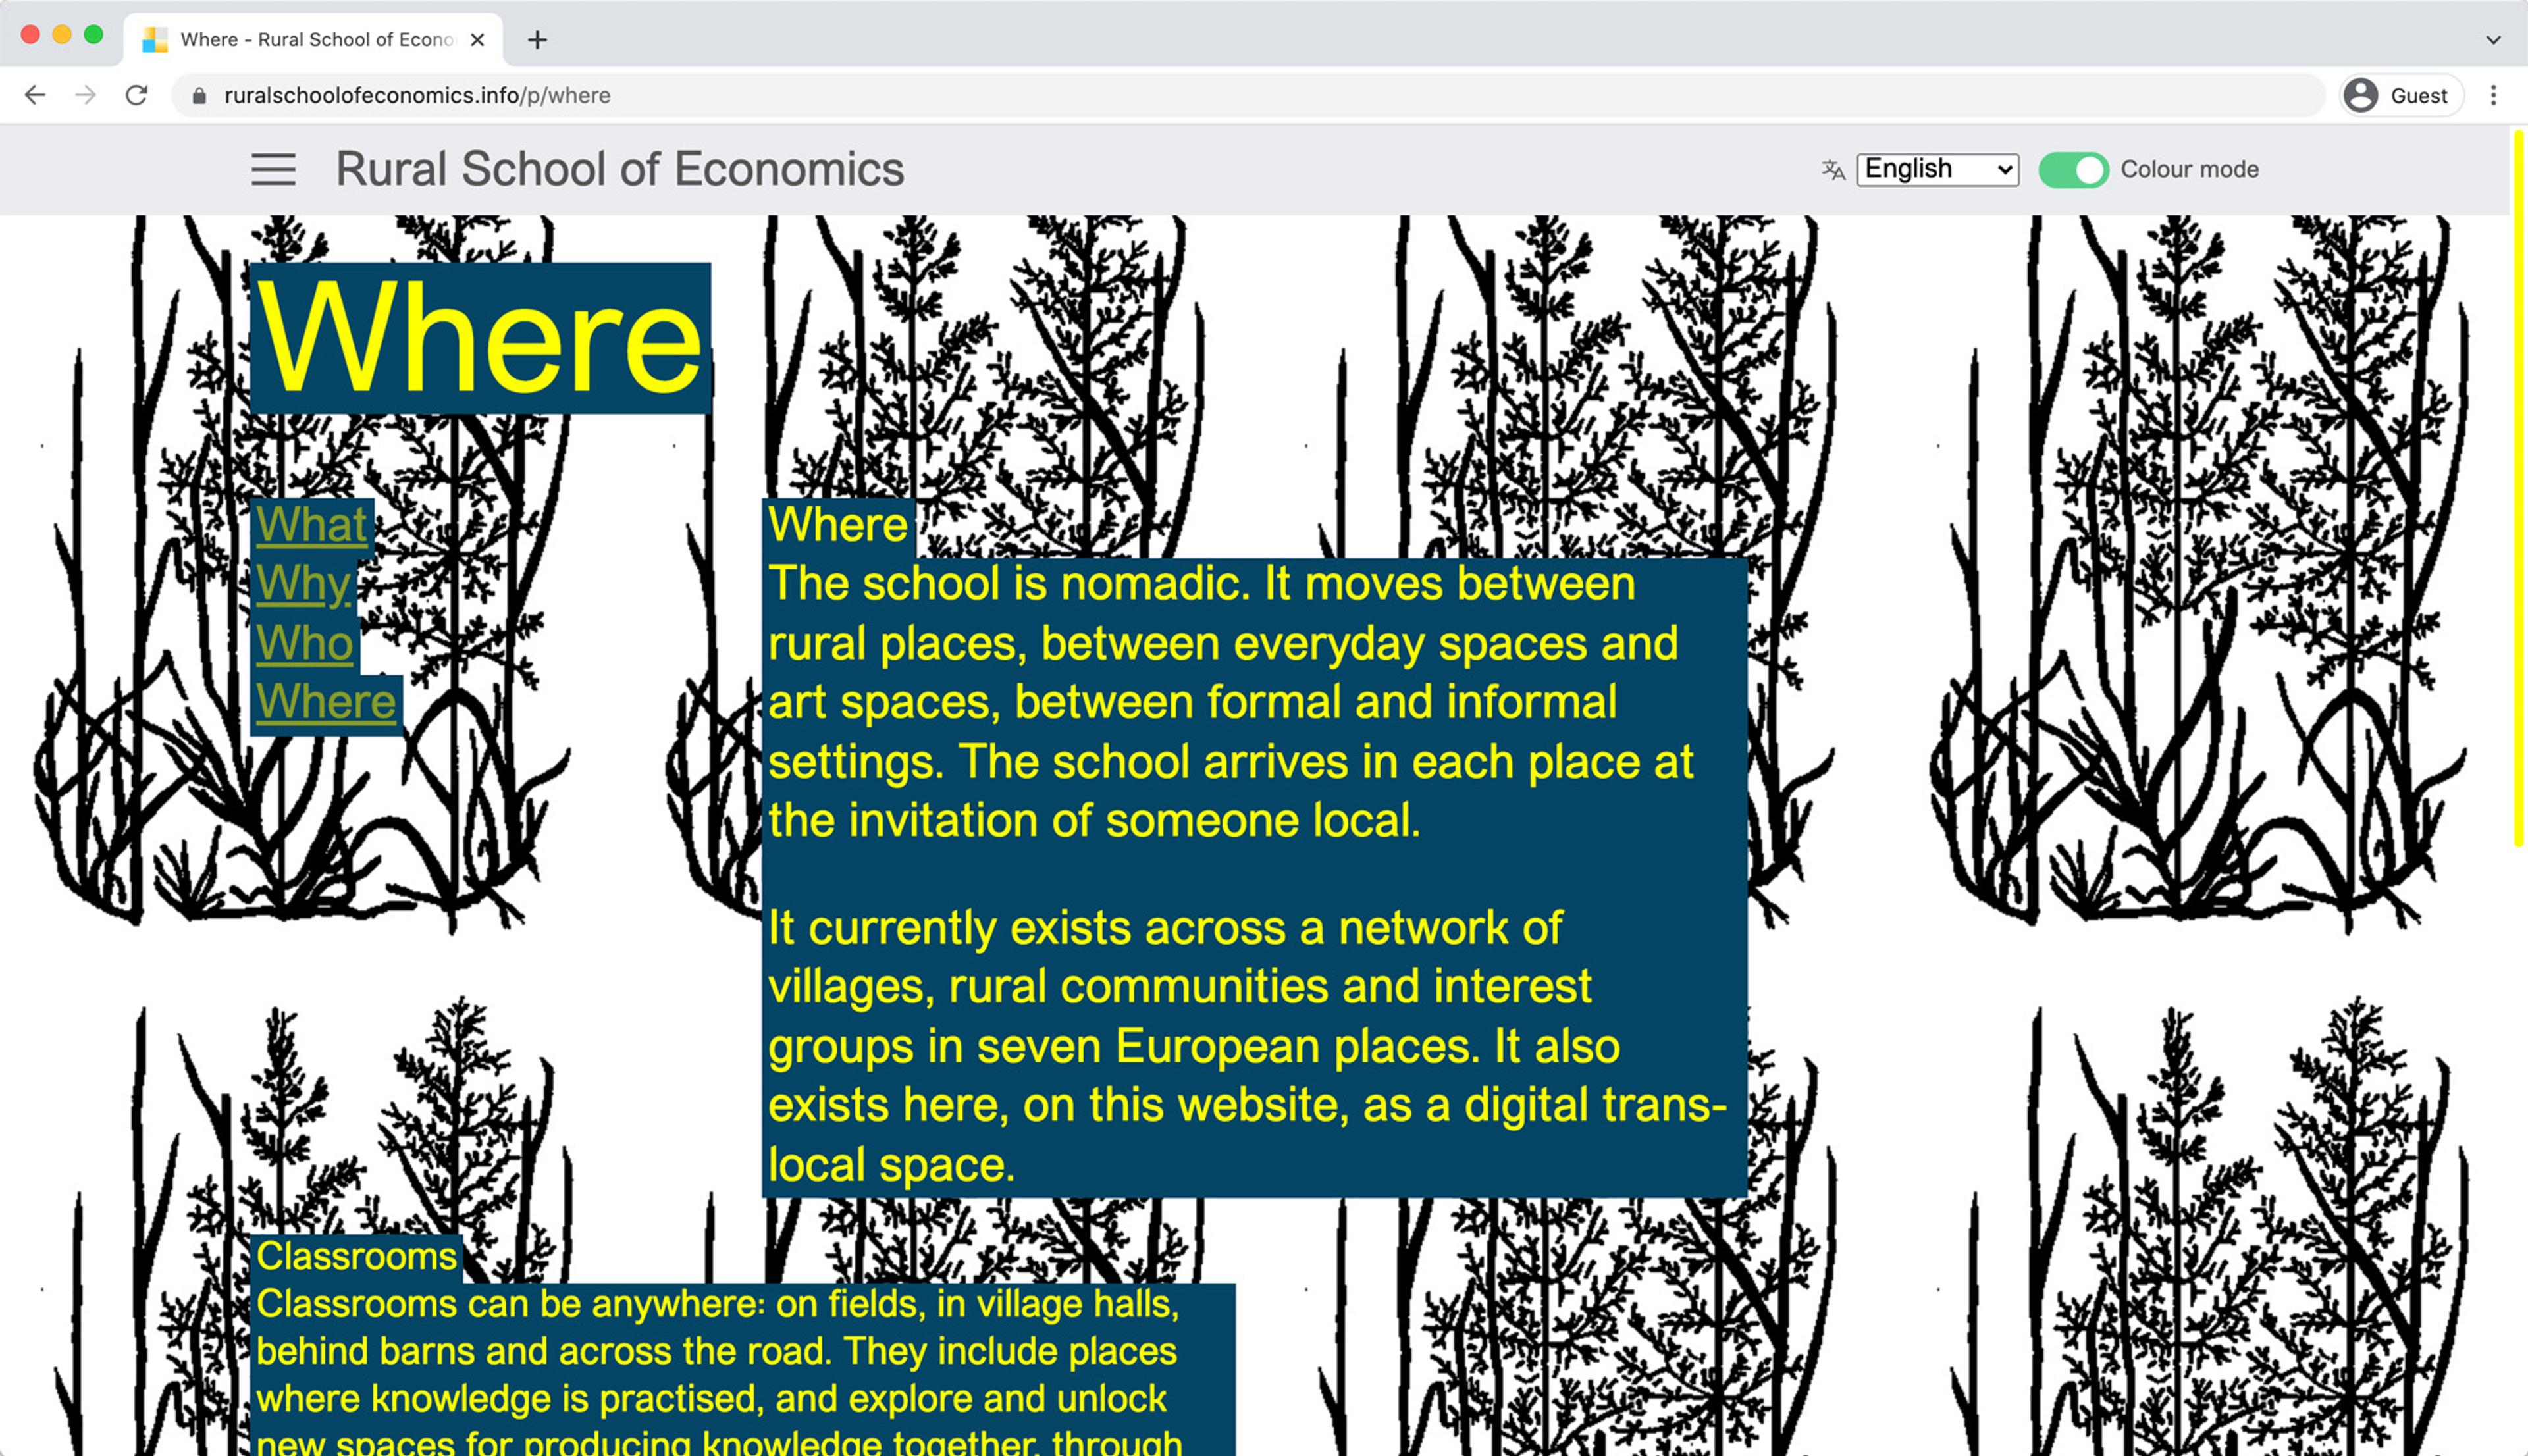 Screengrab of the Rural School of Economics where page. It includes a repeat background image of a drawing with text modules overlaid